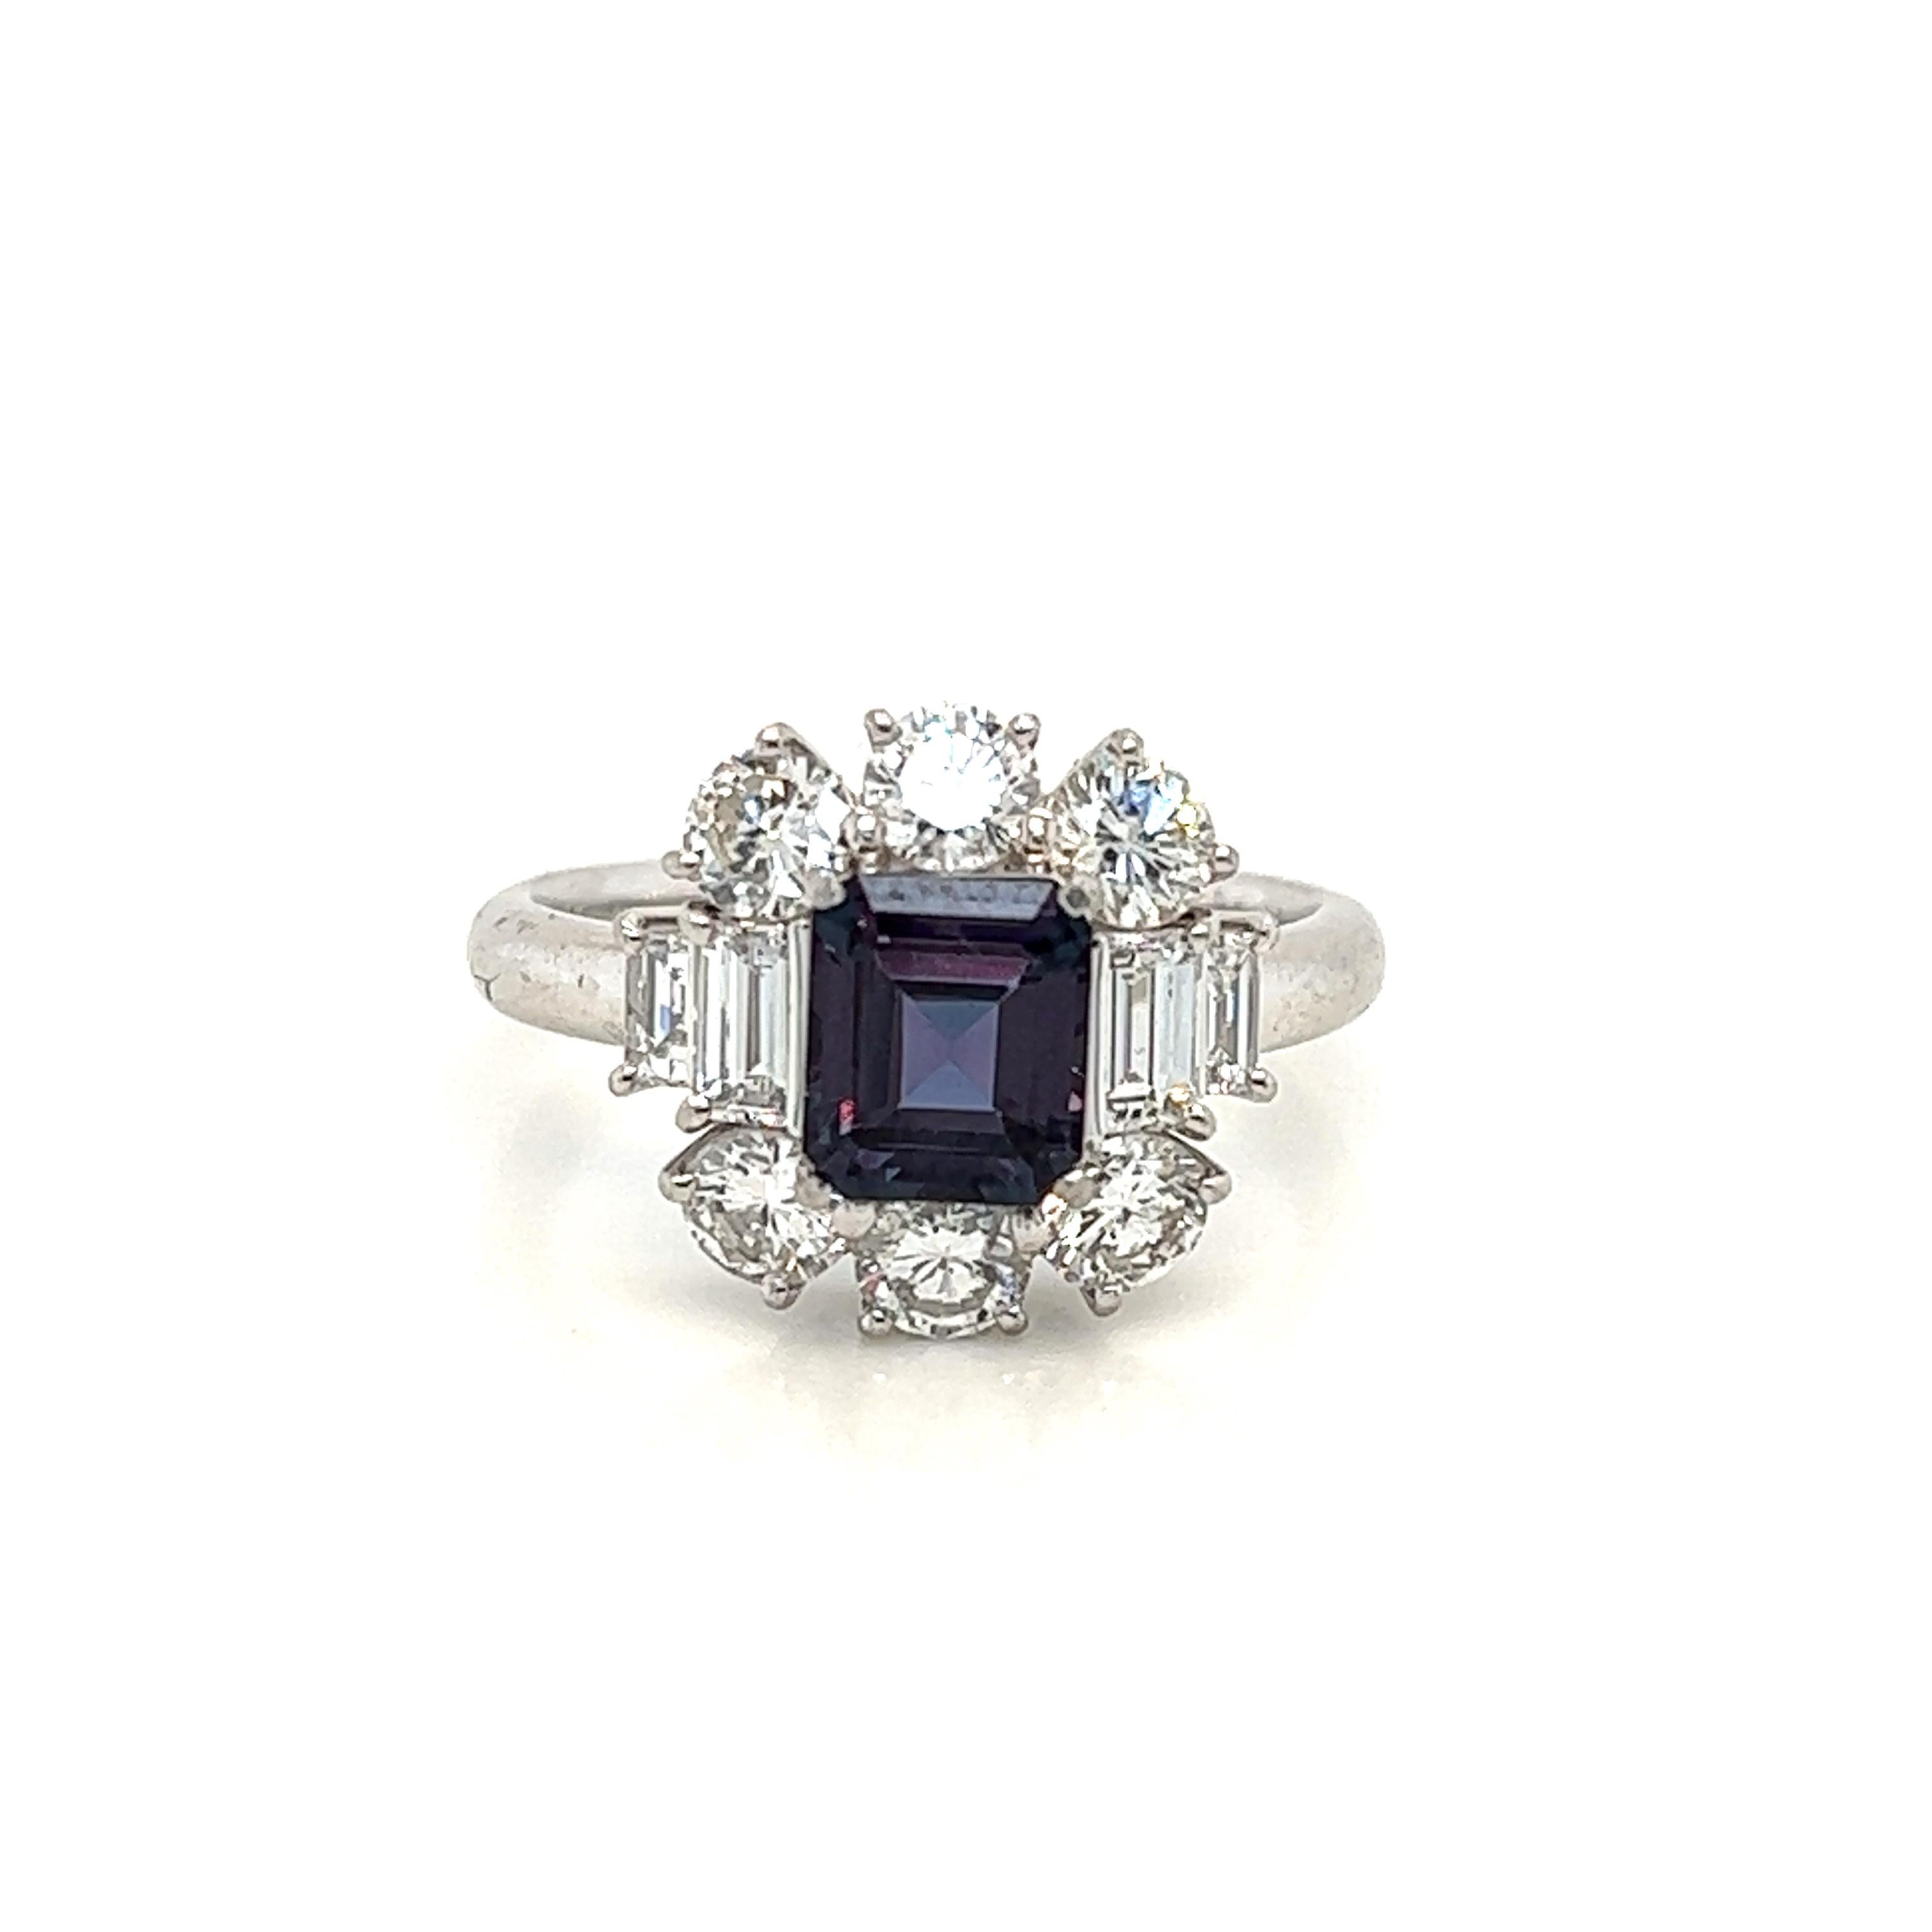 This is a gorgeous natural AAA quality E-Cut Alexandrite surrounded by dainty diamonds that is set in a cocktail platinum setting. This ring features a natural 1.00 carat E-Cut alexandrite that is certified by the Gemological Institute of America